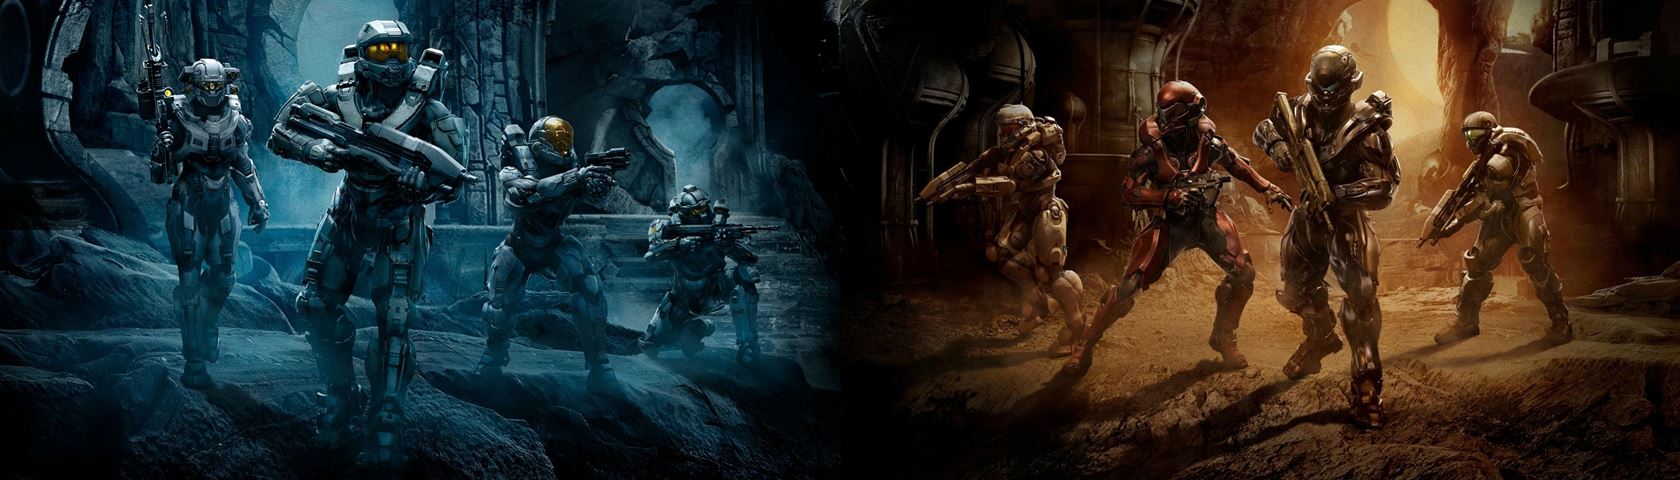 Halo 5 Guardians - Dual Screen • Images • WallpaperFusion by Binary  Fortress Software